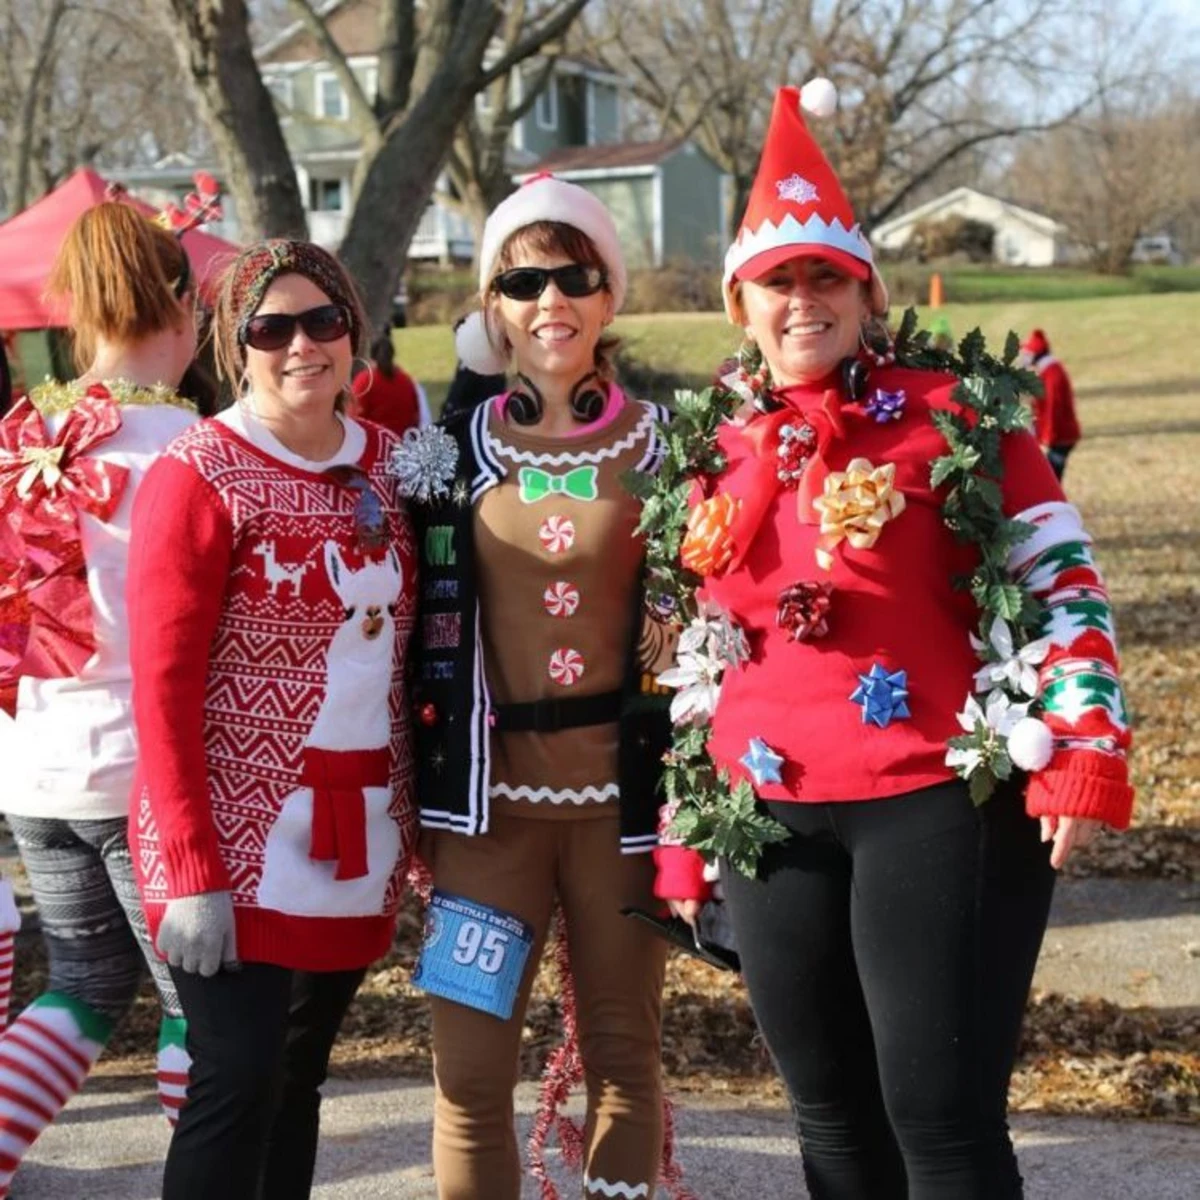 It's Christmas in LeClaire With Plenty of Holiday Fun